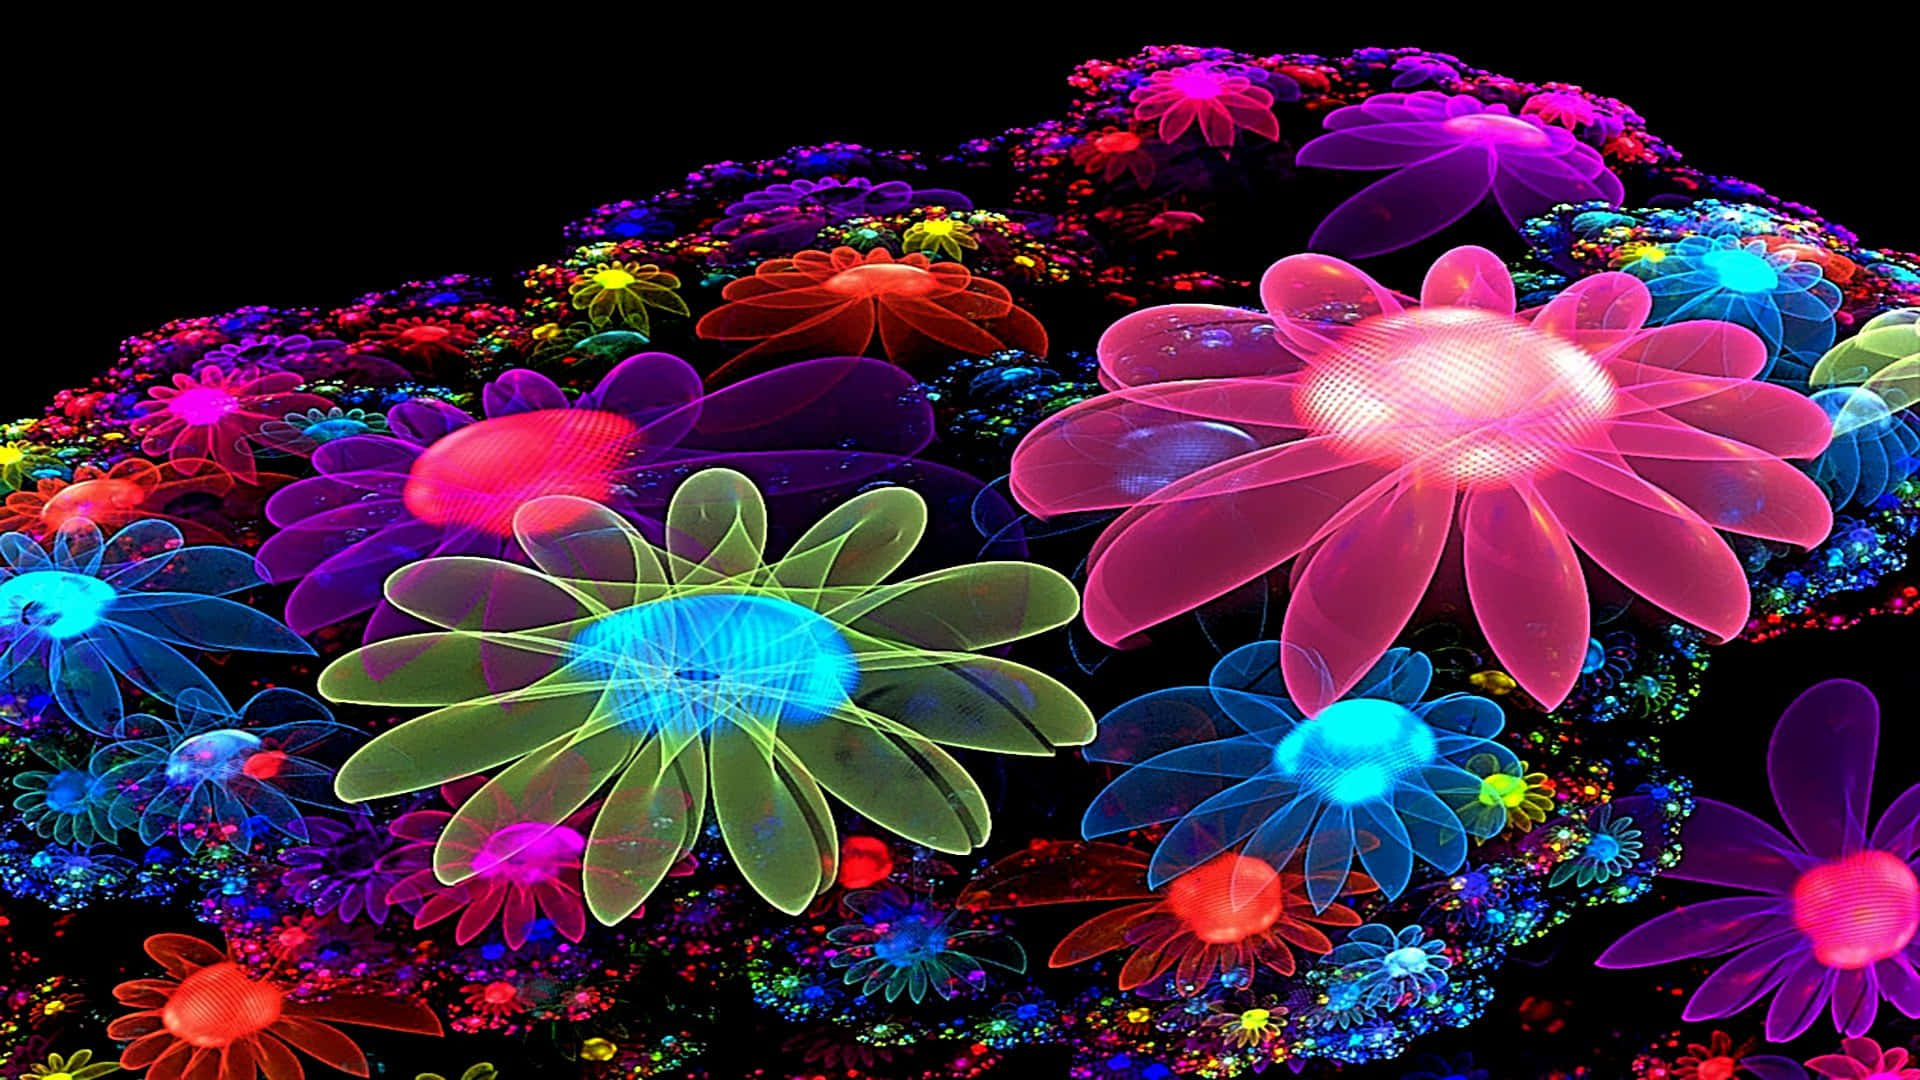 Download A beautiful vibrant display of neon flowers in bloom